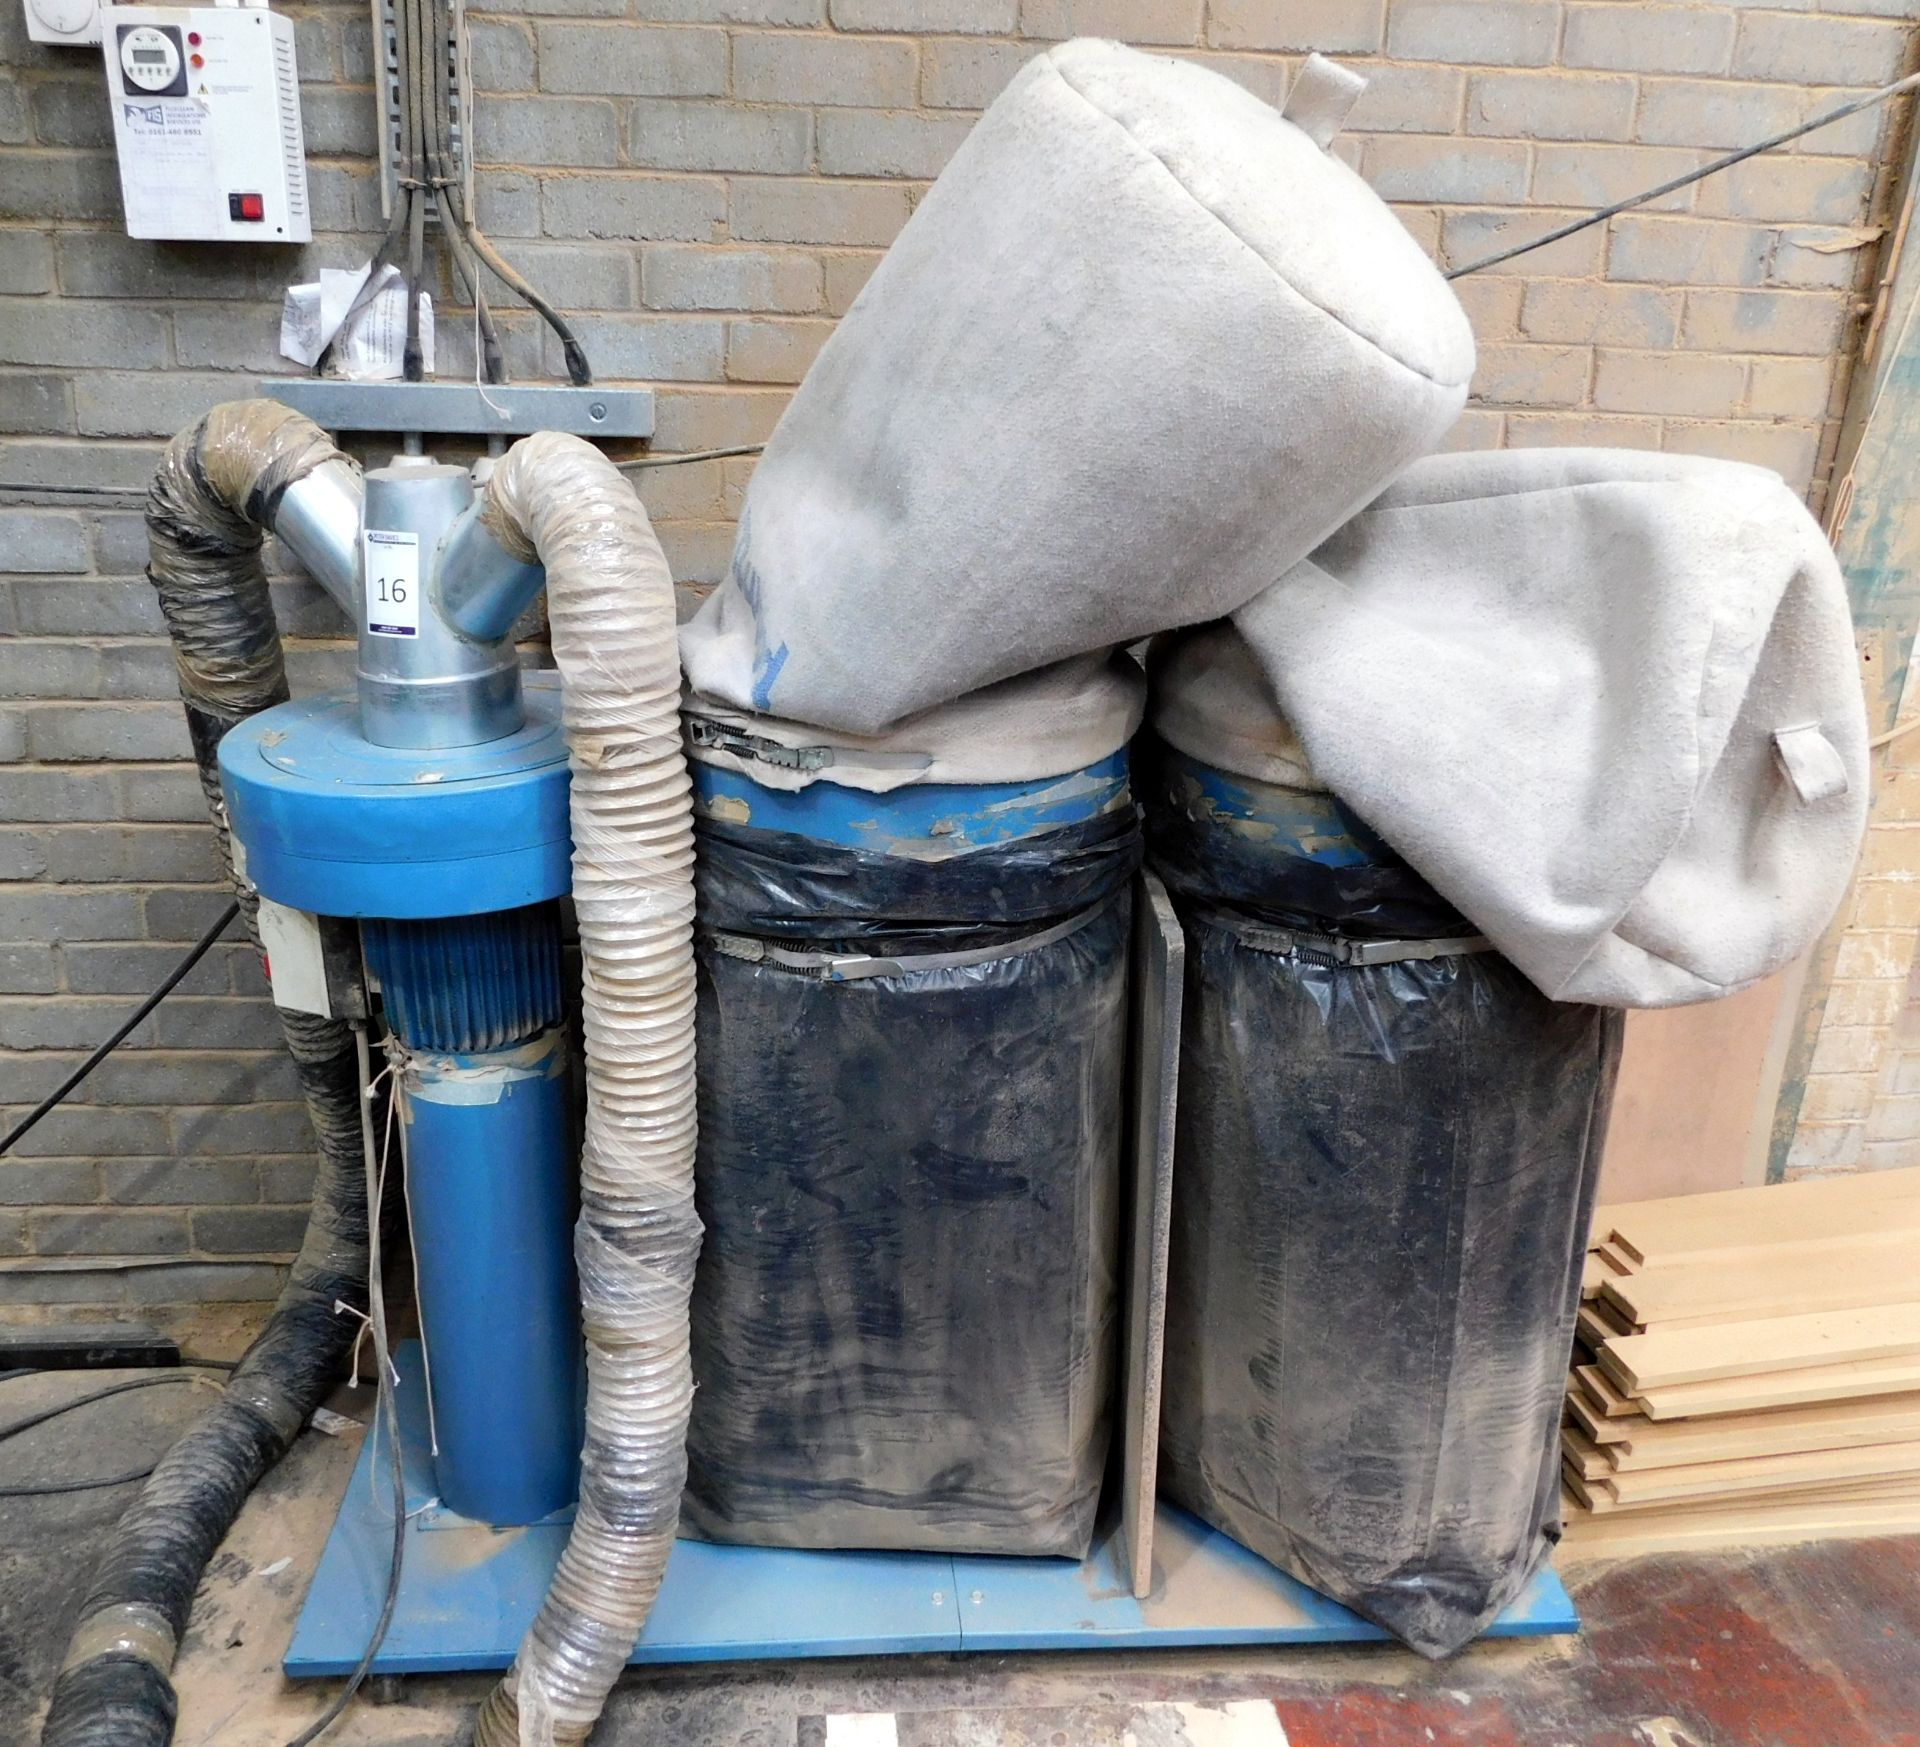 Charnwood Double Bag Dust Extractor, 415v (Collection – Friday 25th, Tuesday 29th or Wednesday